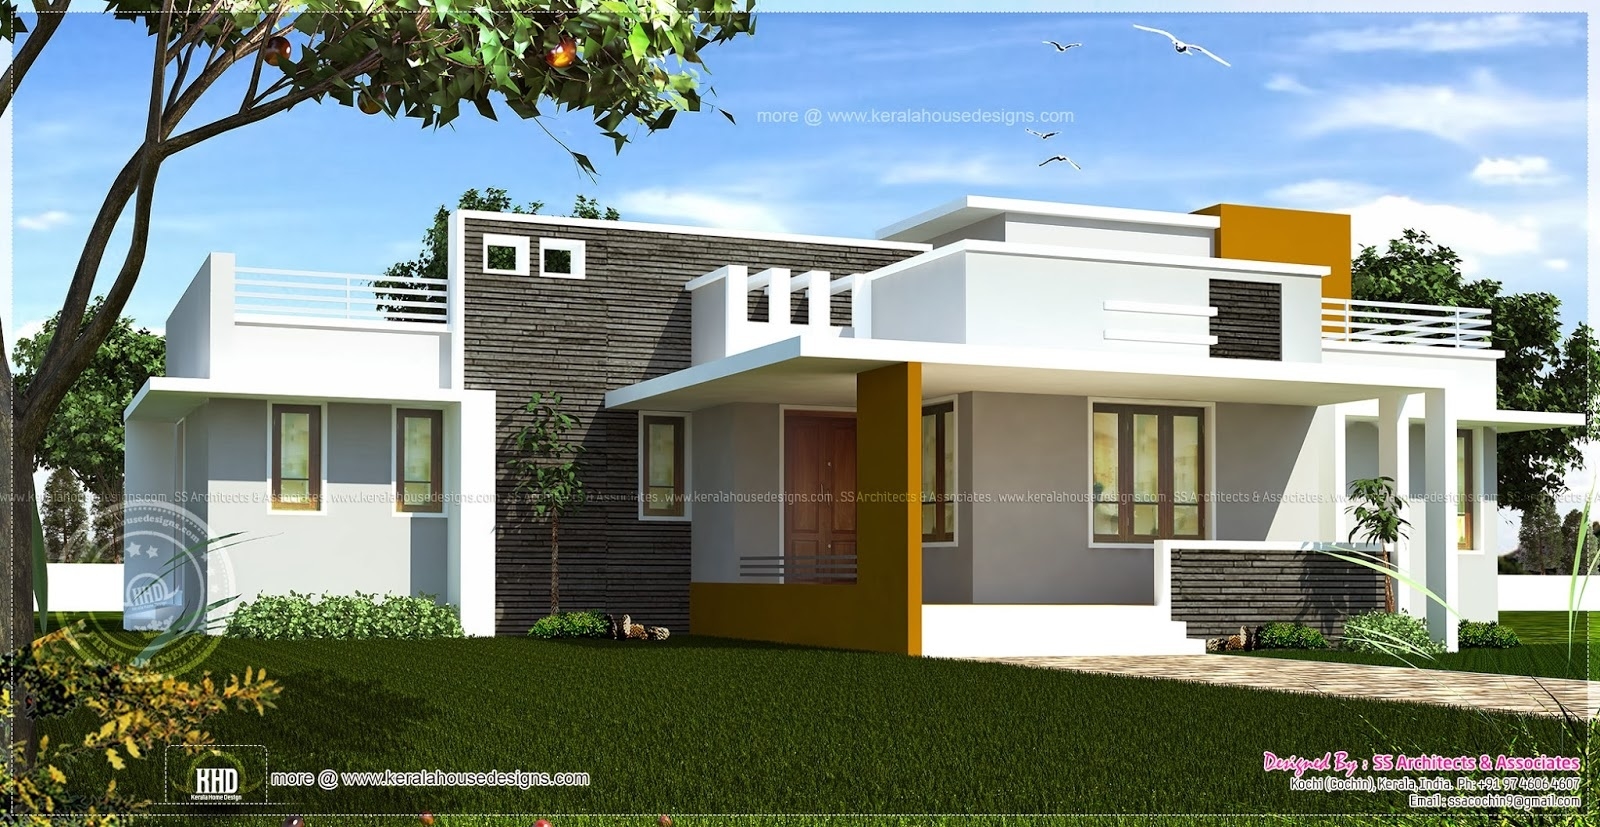 Top single floor contemporary house design | indian house plans for must see front design of house single storey